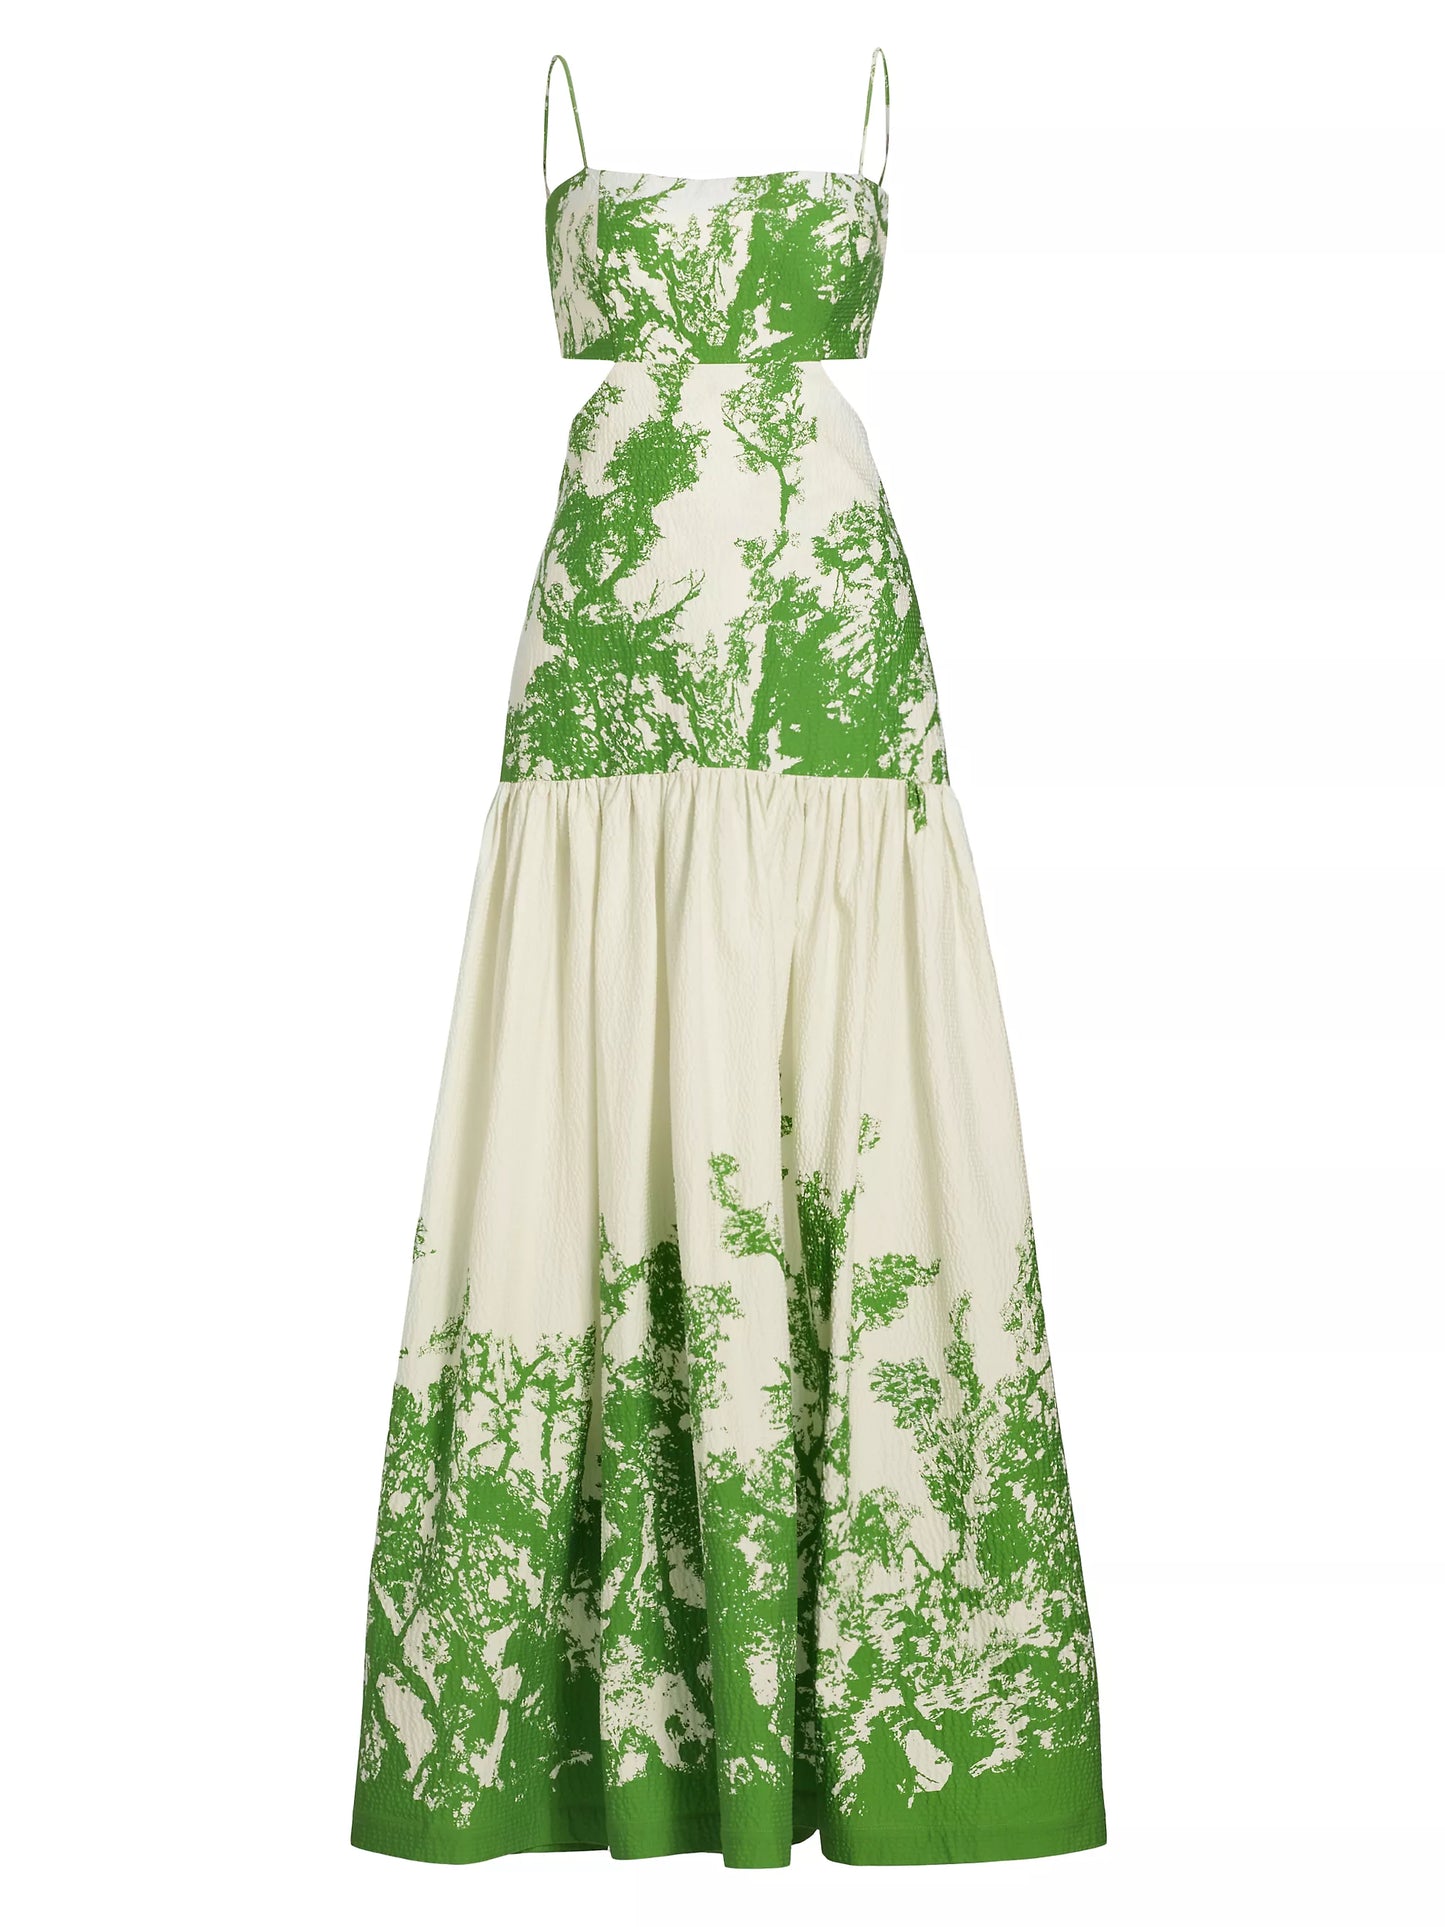 A Shannon Dress Green Cyprus with green leaves on crinkled cotton fabric.